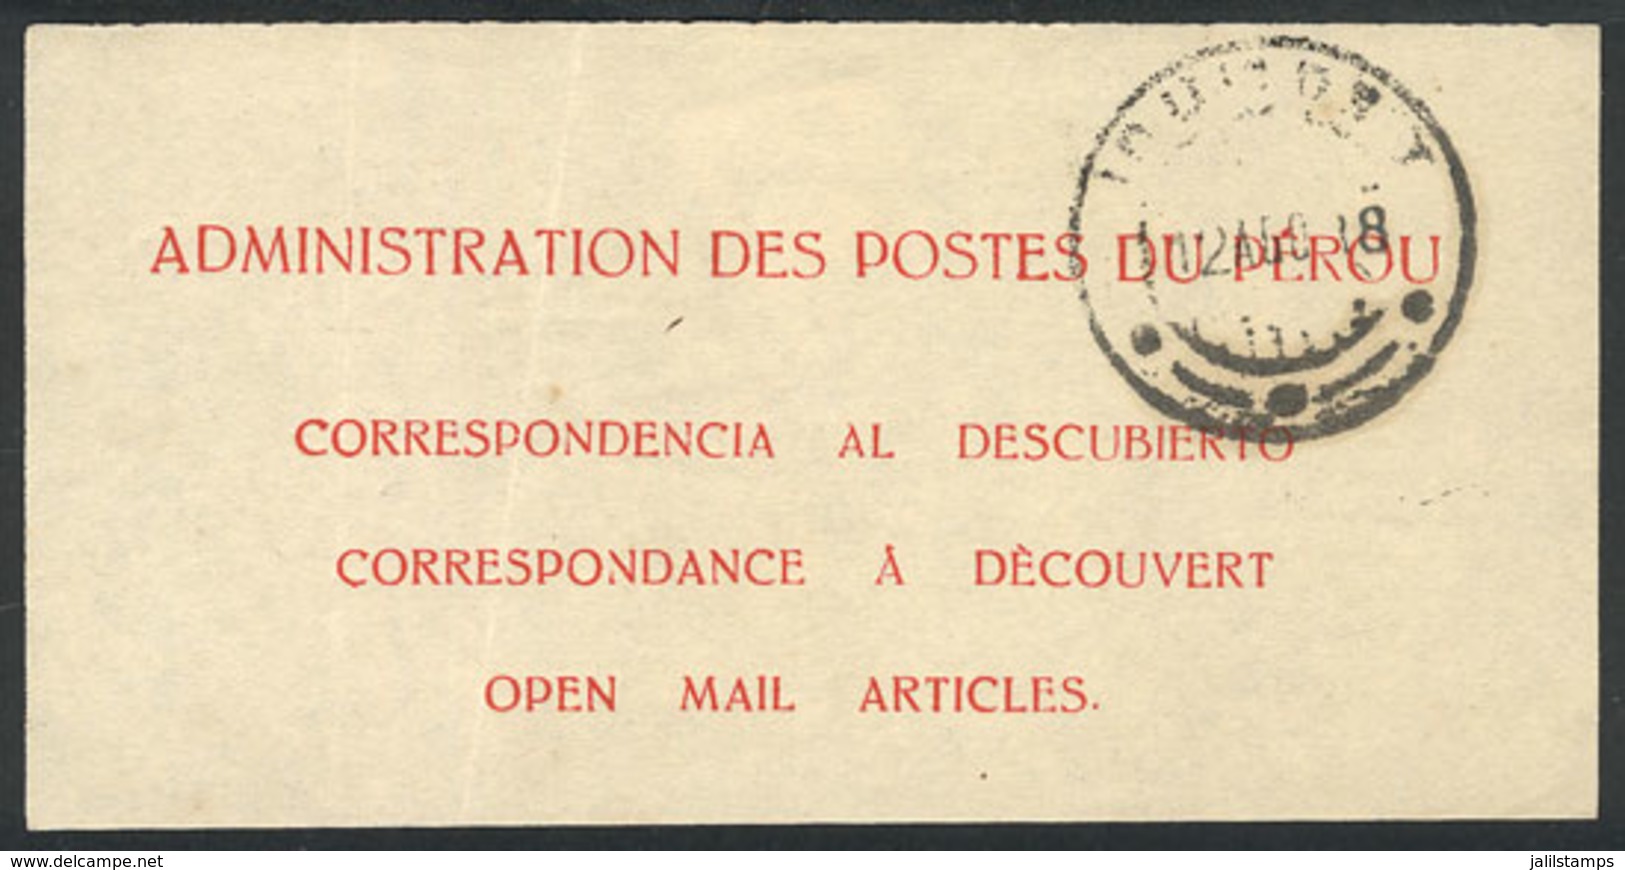 PERU: Postal Label For "OPEN MAIL ARTICLES", Used In Iquique On 12/AU/1938?, VF Quality, Rare!" - Perù